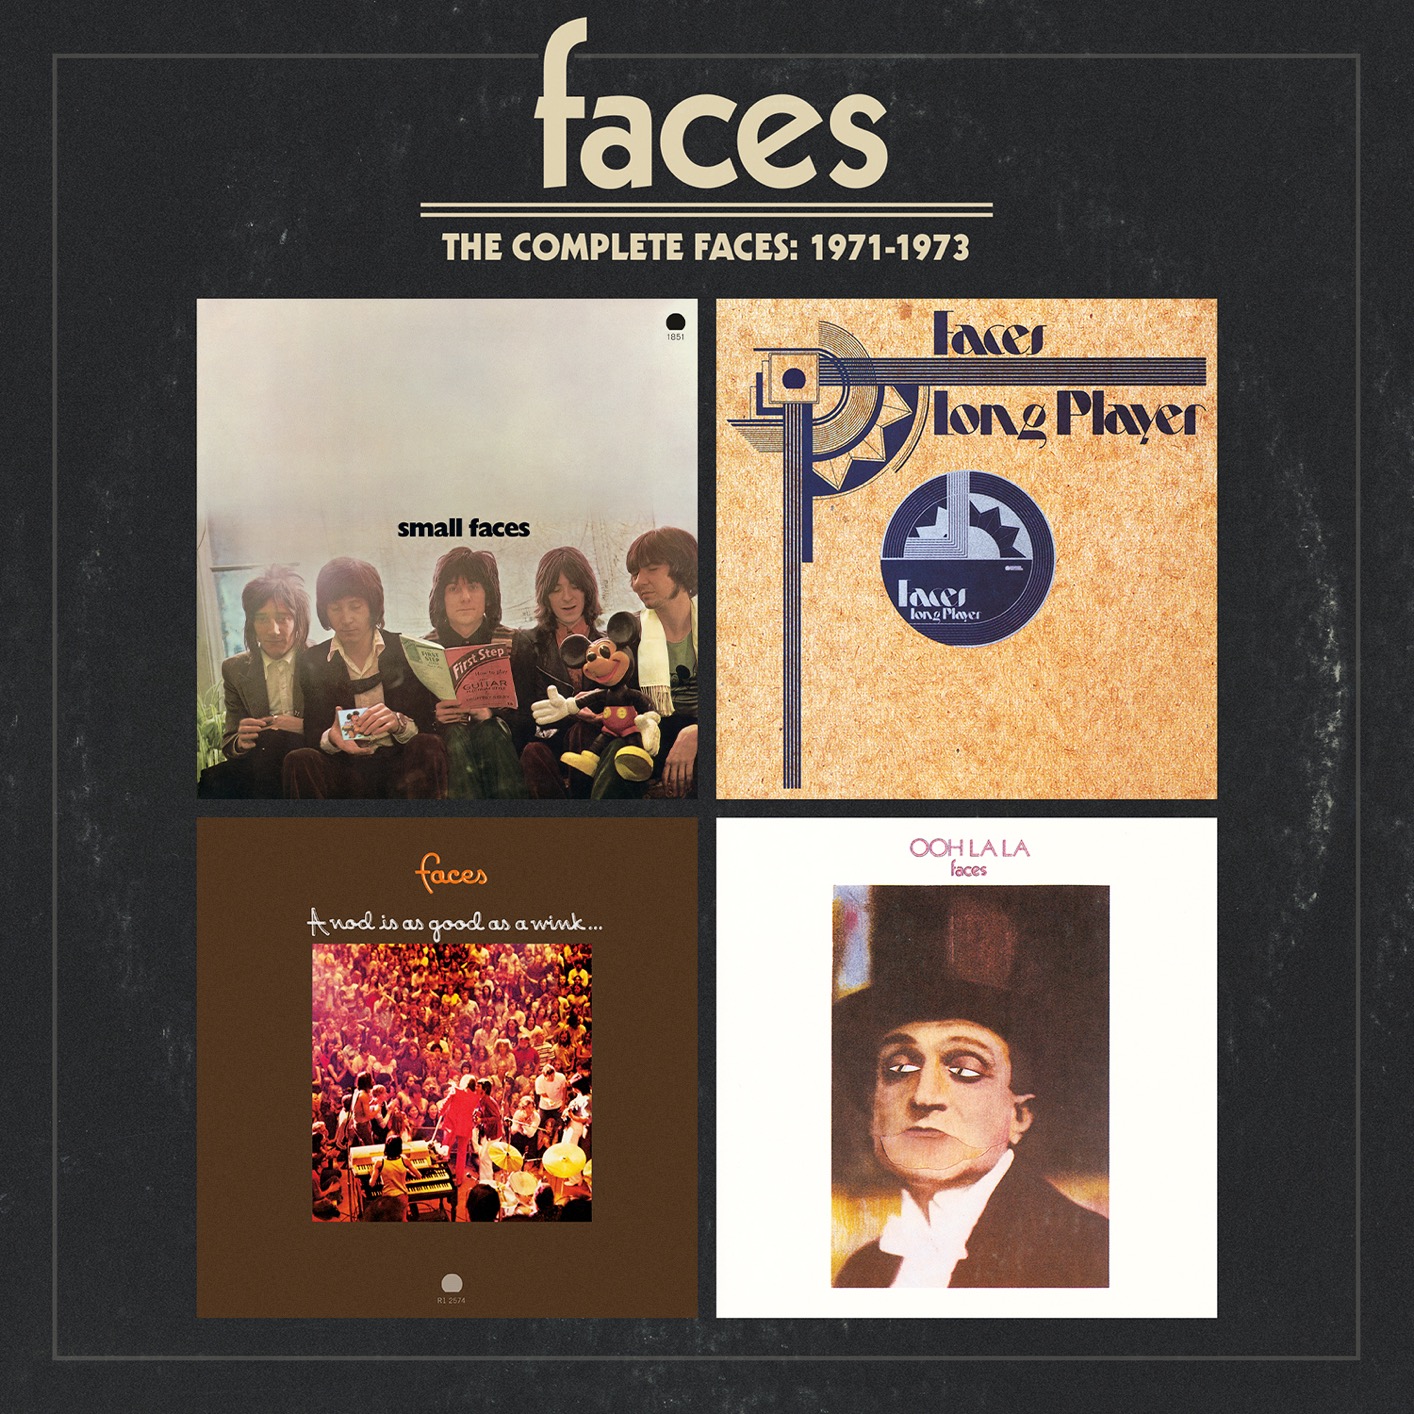 Faces – The Complete Faces: 1971-1973 (Remastered) (2014/2019) [FLAC 24bit/192kHz]